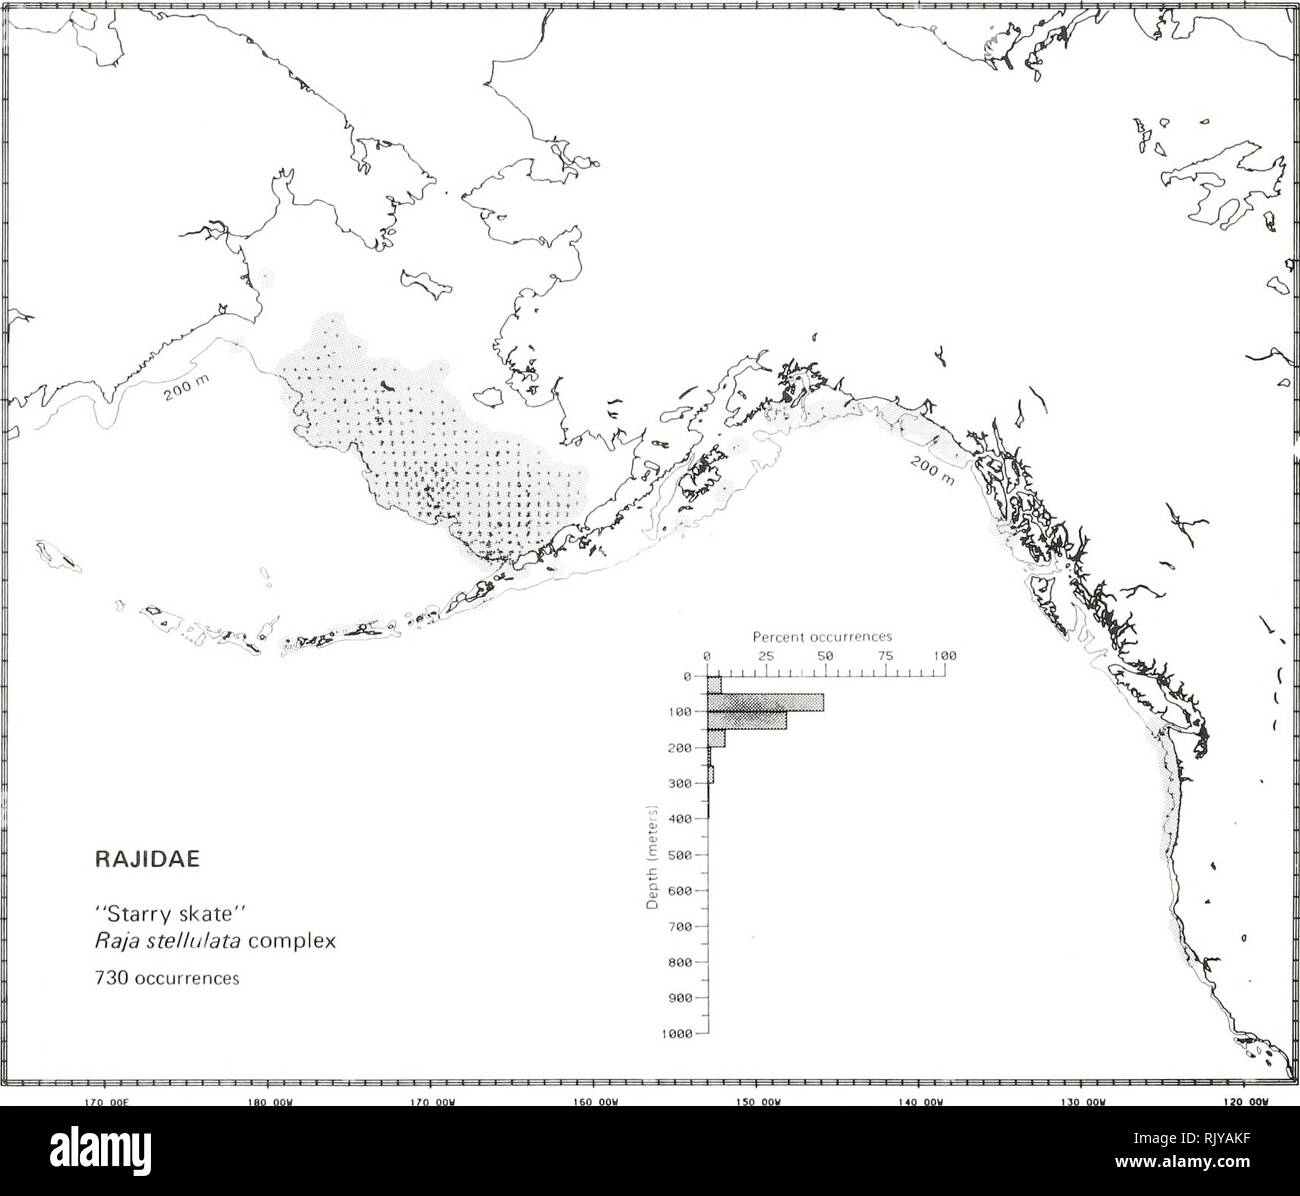 . Atlas and zoogeography of common fishes in the Bering Sea and Northeastern Pacific / M. James Allen, Gary B. Smith. Fishes Bering Sea Geographical distribution.. 'STARRY SKATE,&quot; Raja stellulata Complex Rajidae: Skates Taxonomie comment This complex includes at least two species: the Alaska skate, Bathyraja pannifera (Bean 1881), and the starry skate, Raja stellulata Jordan and Gilbert 1880, which have been called &quot;starry skate&quot; in the field. Field characters used for distinguishing the two species have only recently been well described (see Eschmeyer and Herald 1983). Literatu Stock Photo